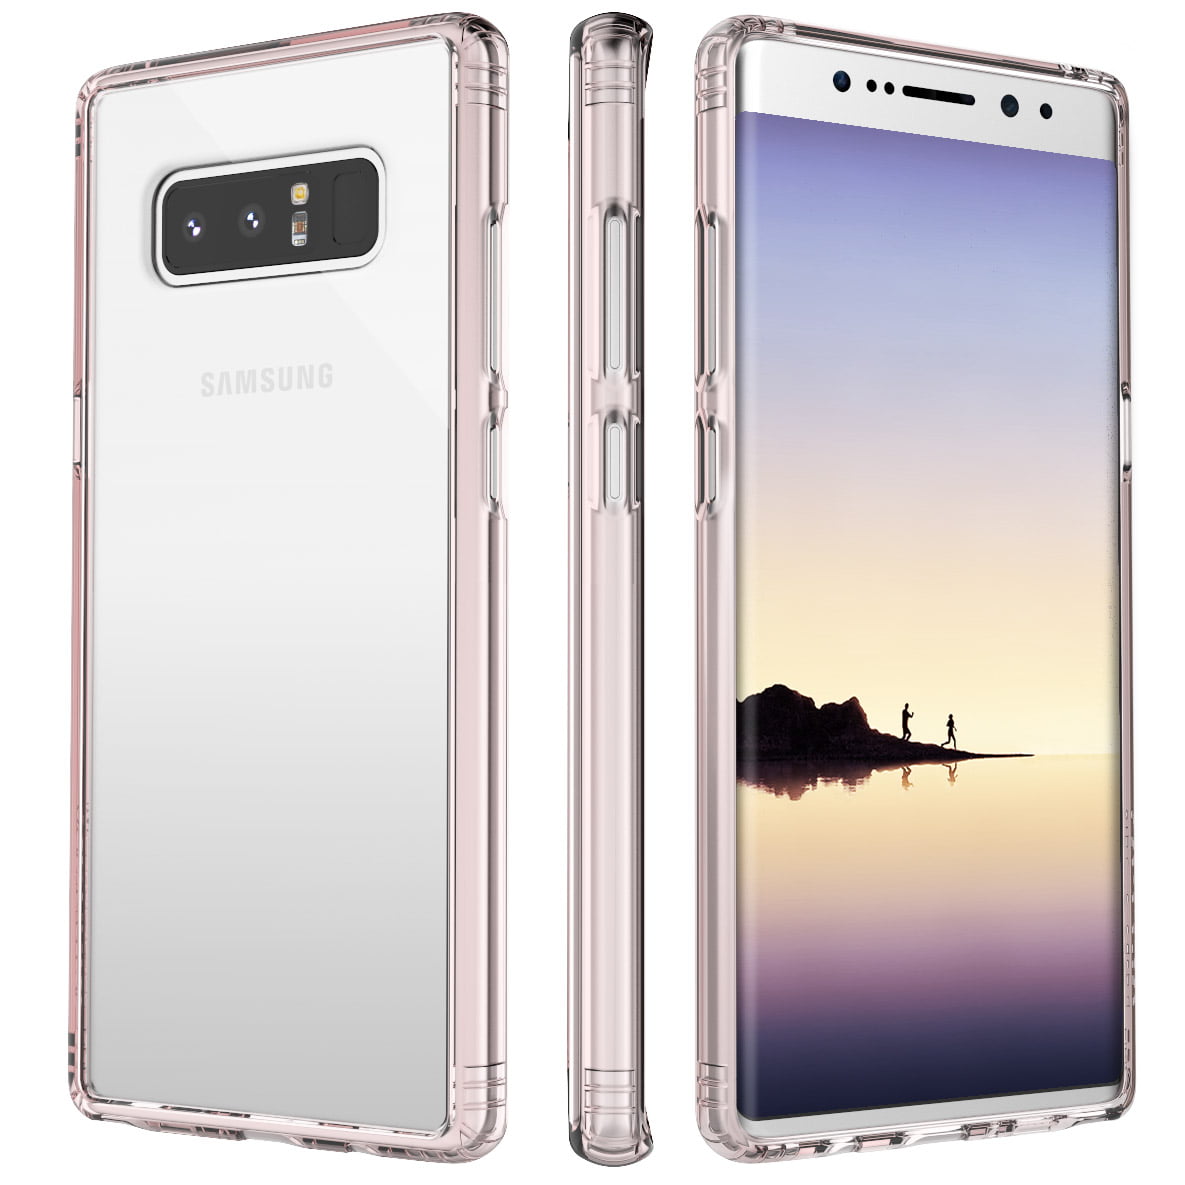 Saharacase Ocl-S-N8-Rog/Cl Classic Case For Samsung Galaxy Note 8, Rose Gold